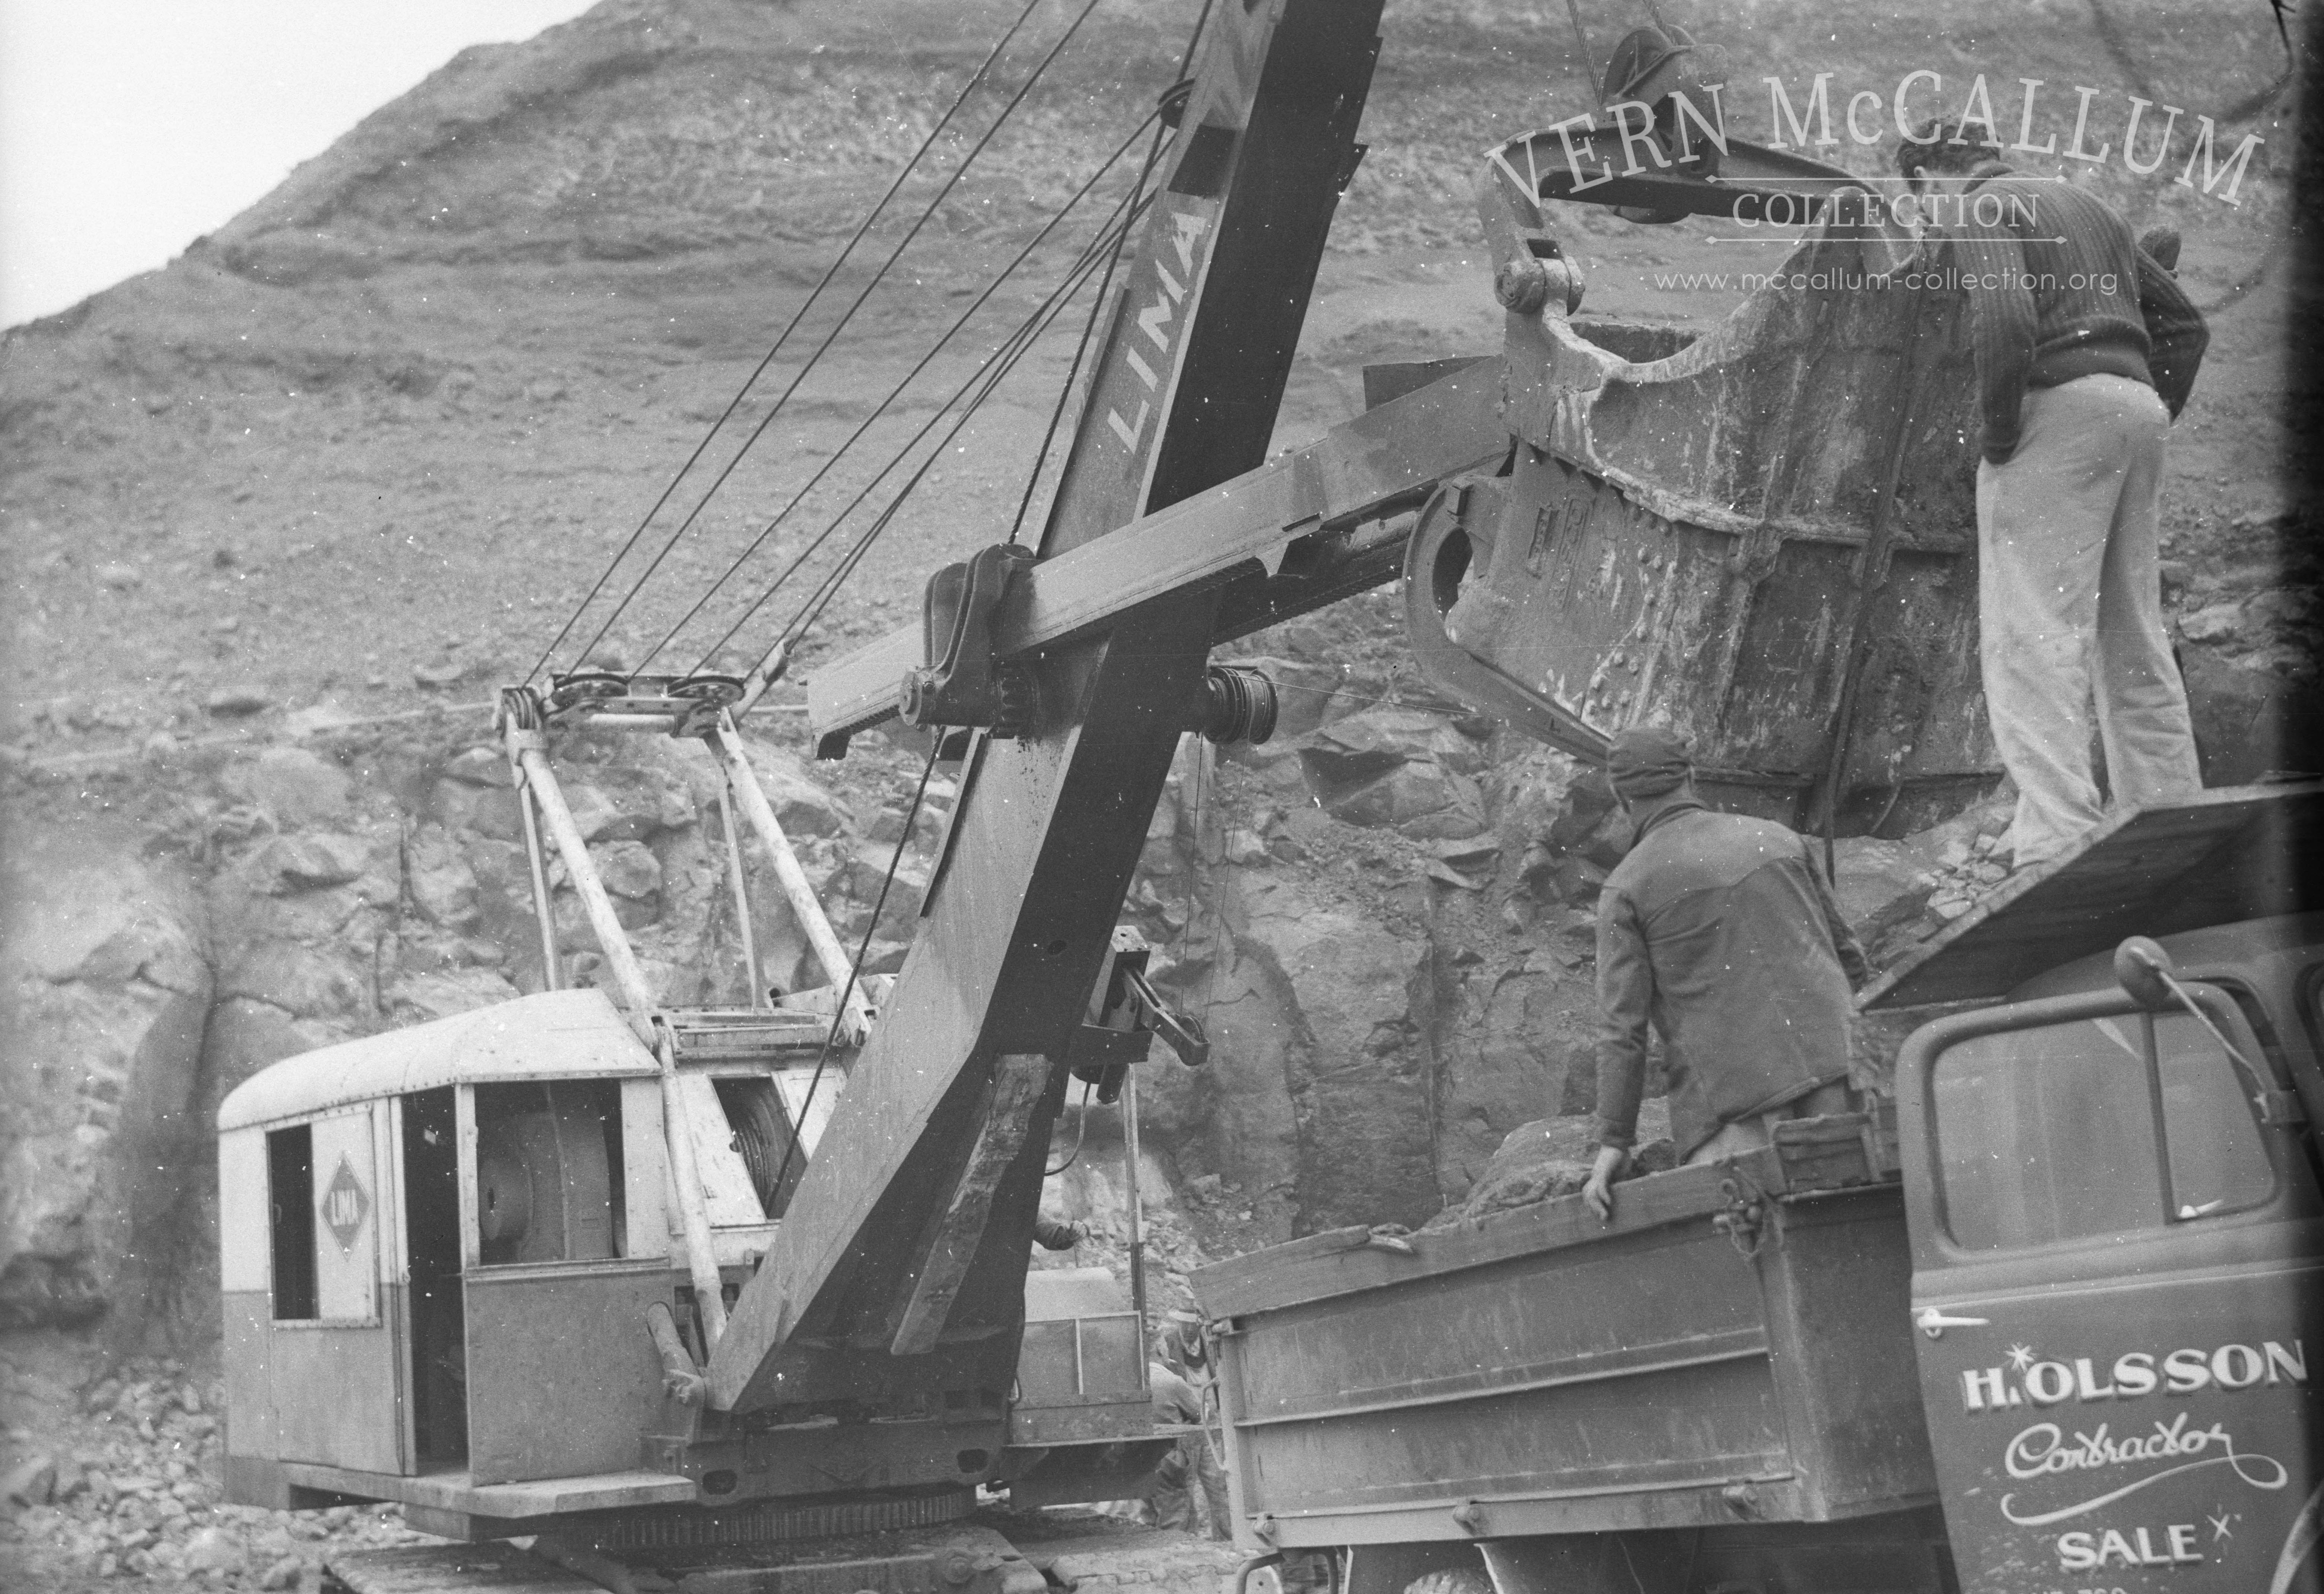 Loading a truck at Cape Grant.